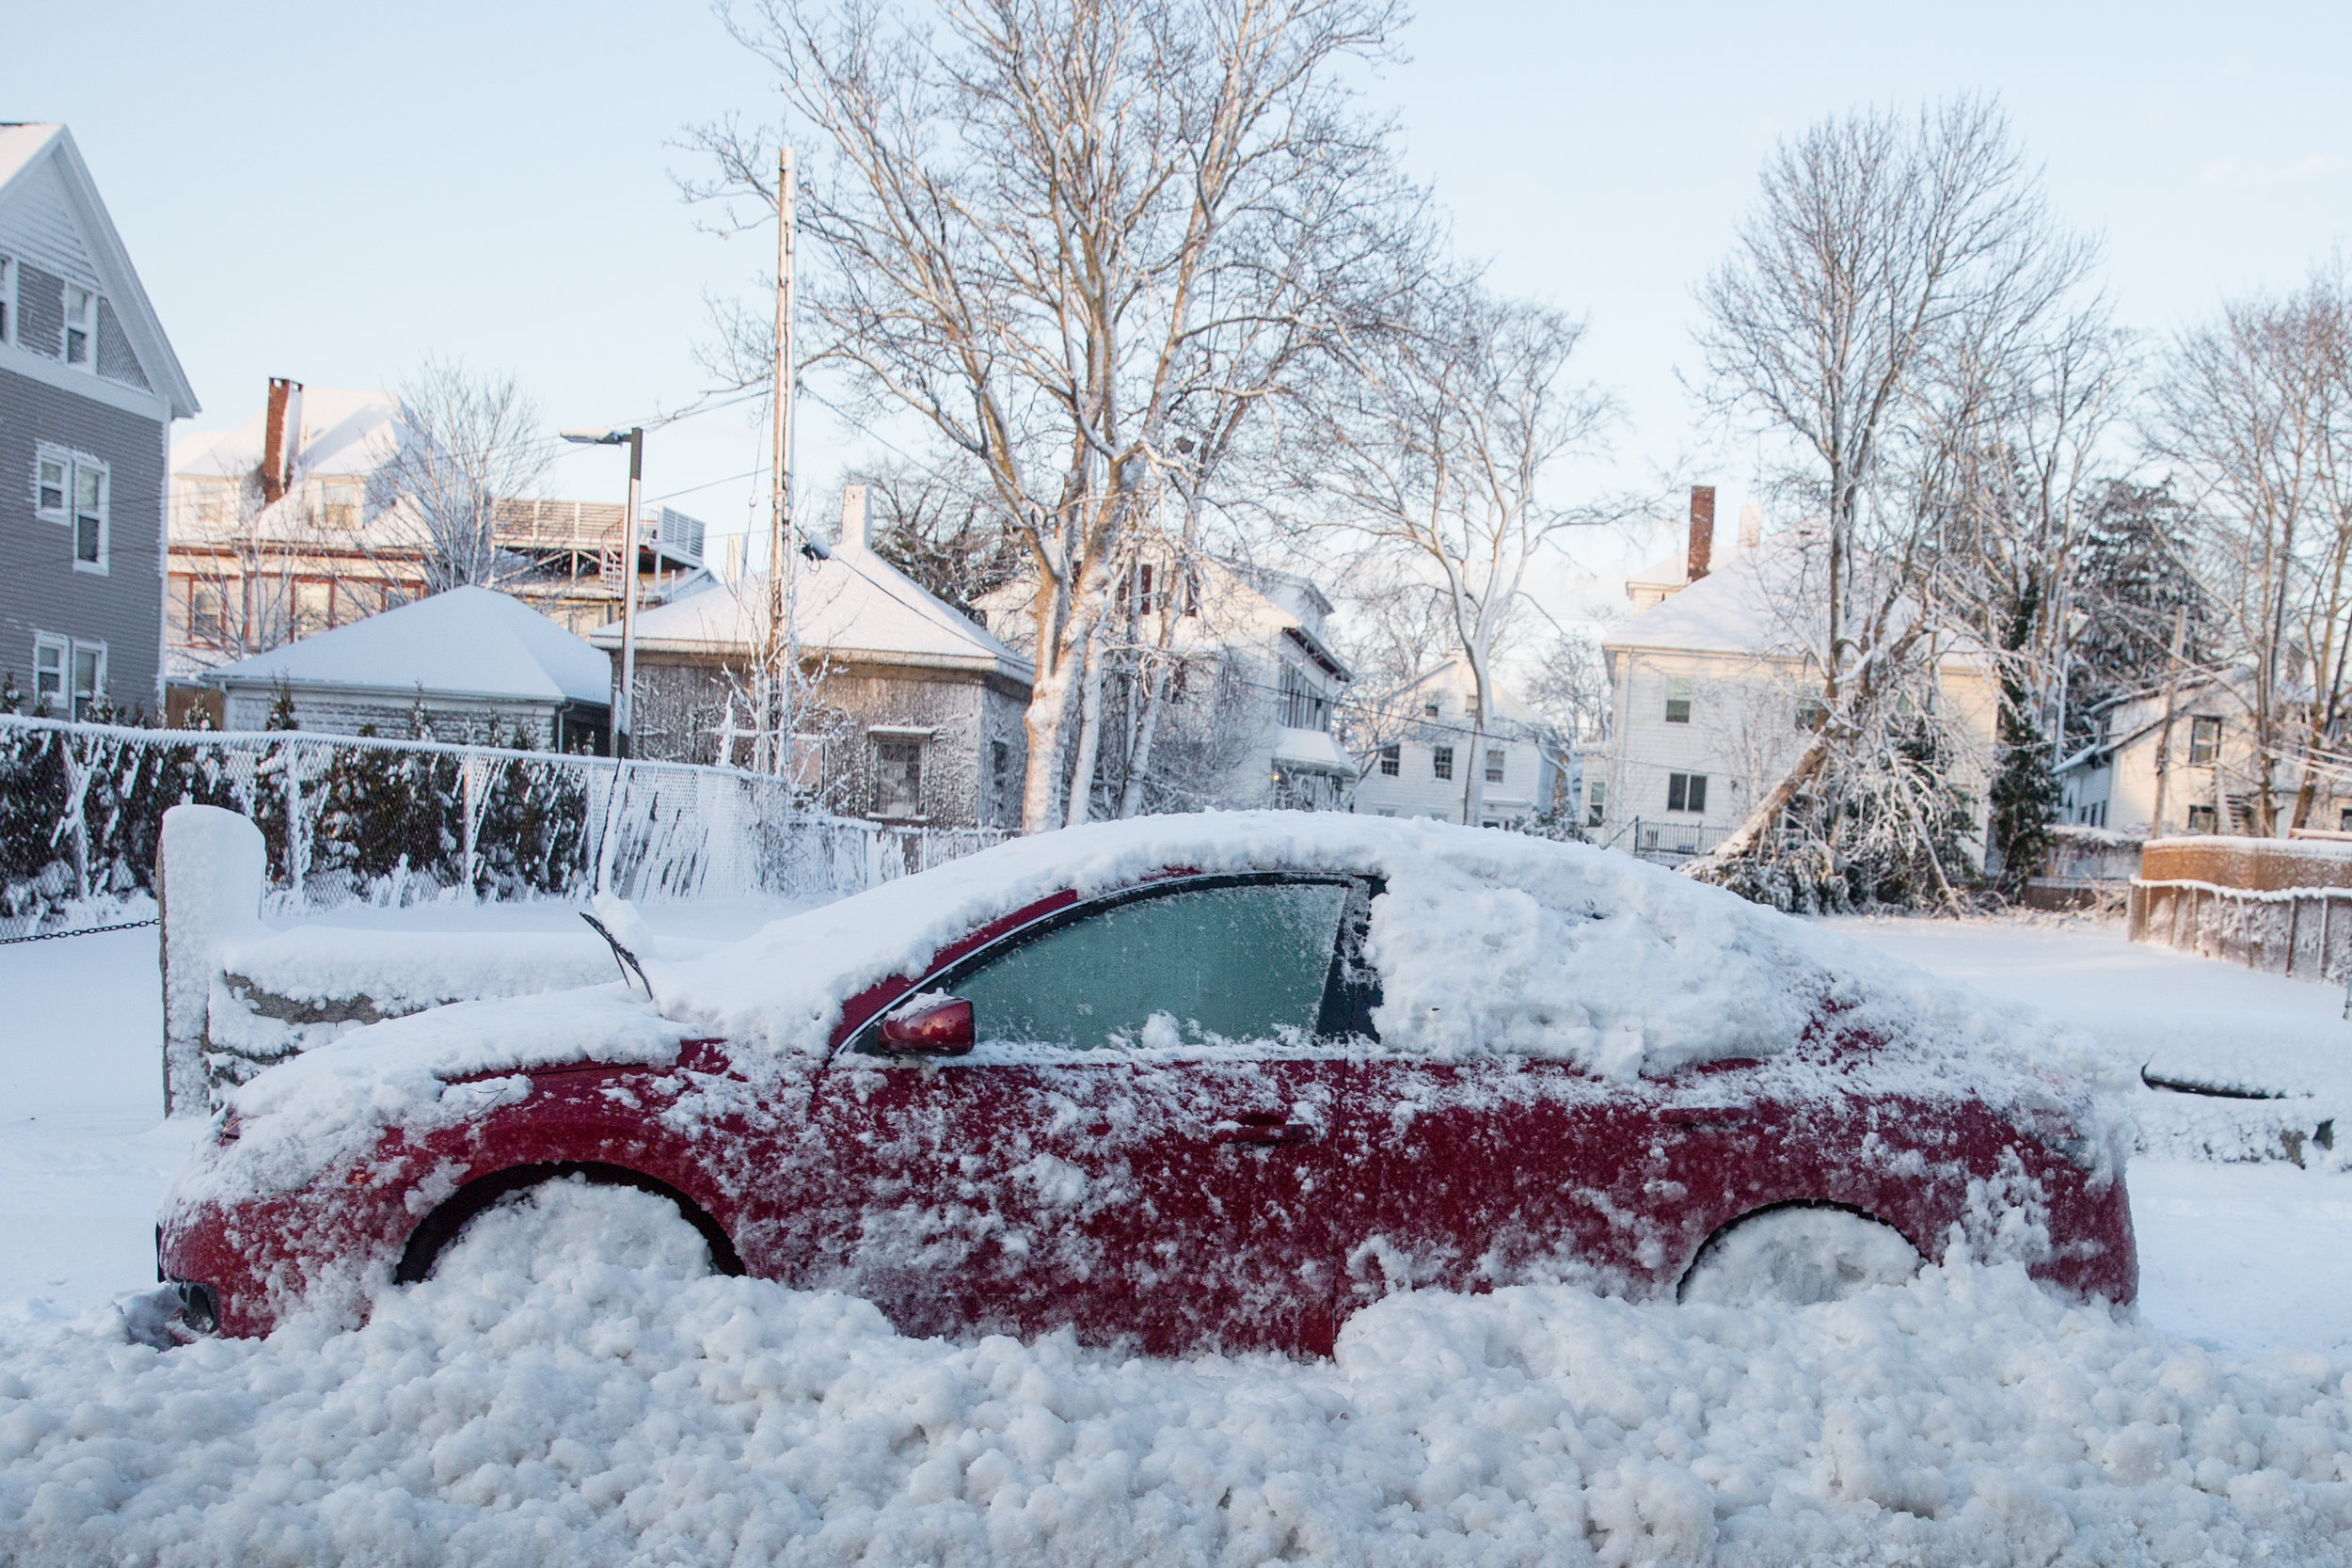  Cars that were left on the street during the parking ban either got towed or plowed in. - New Bedford, MA 